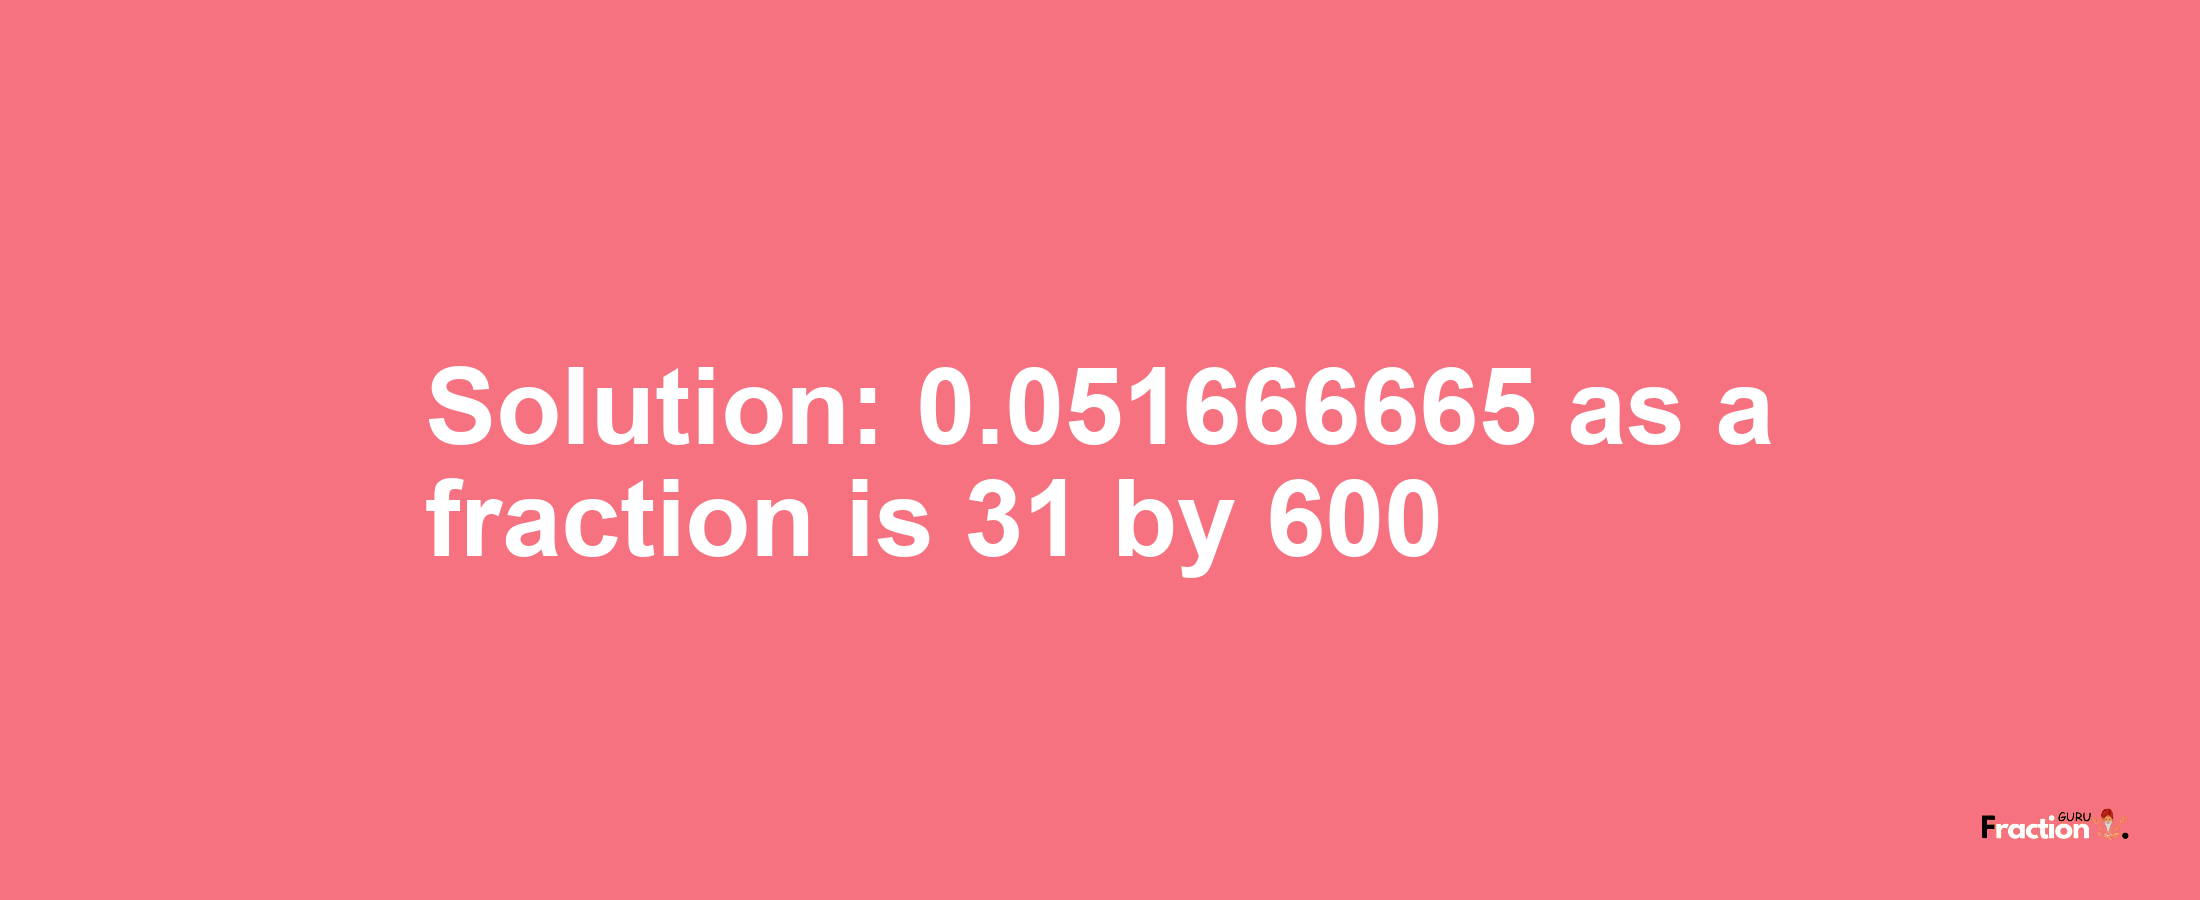 Solution:0.051666665 as a fraction is 31/600